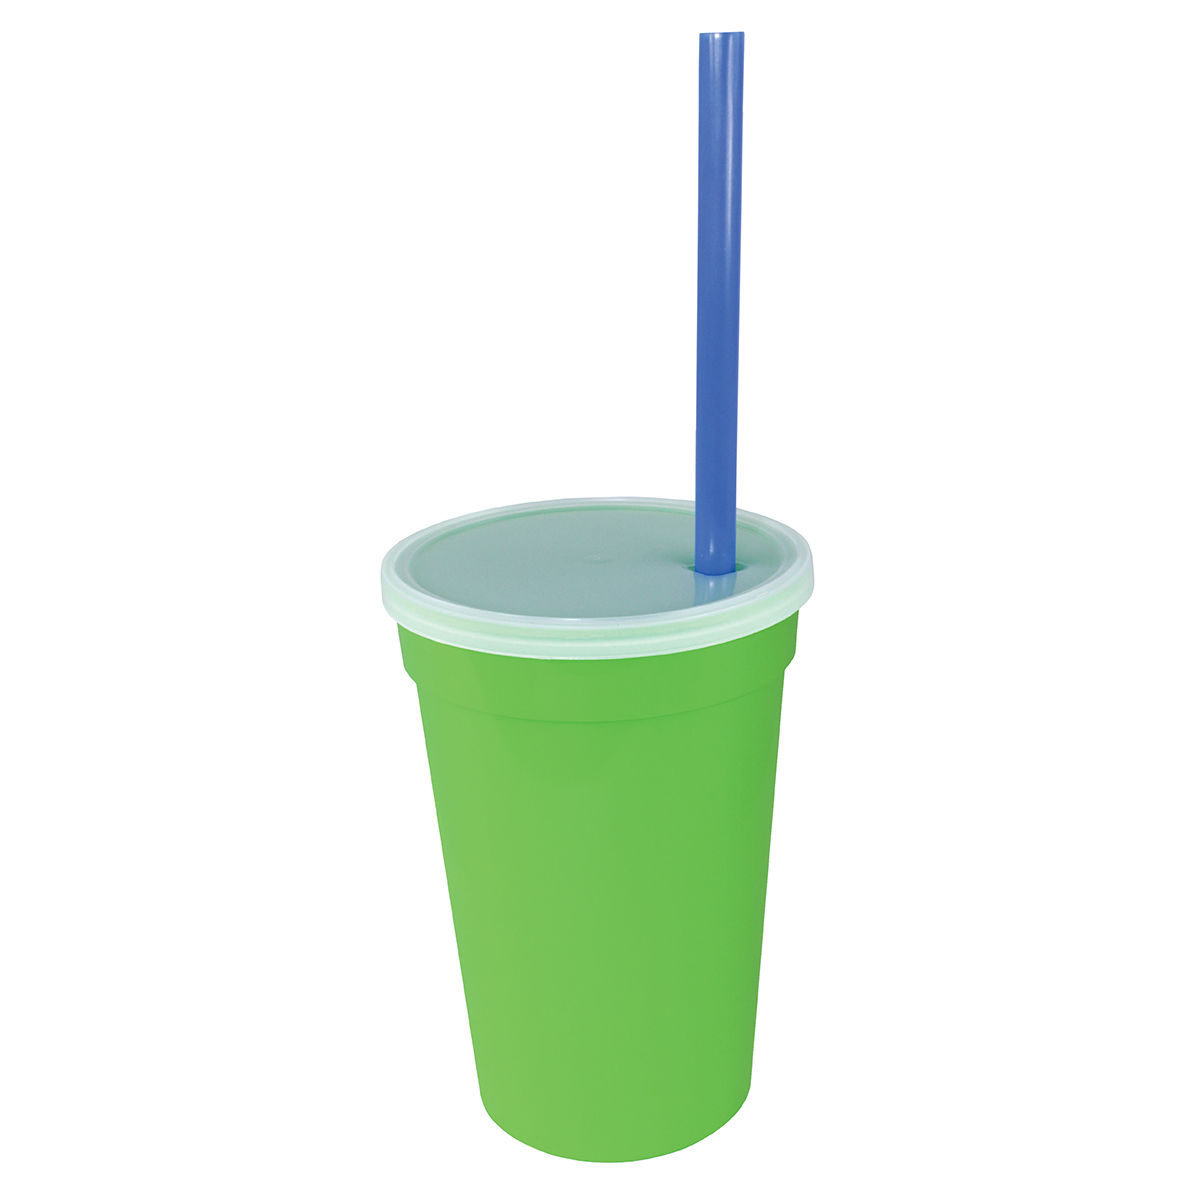 Lime green with blue straw